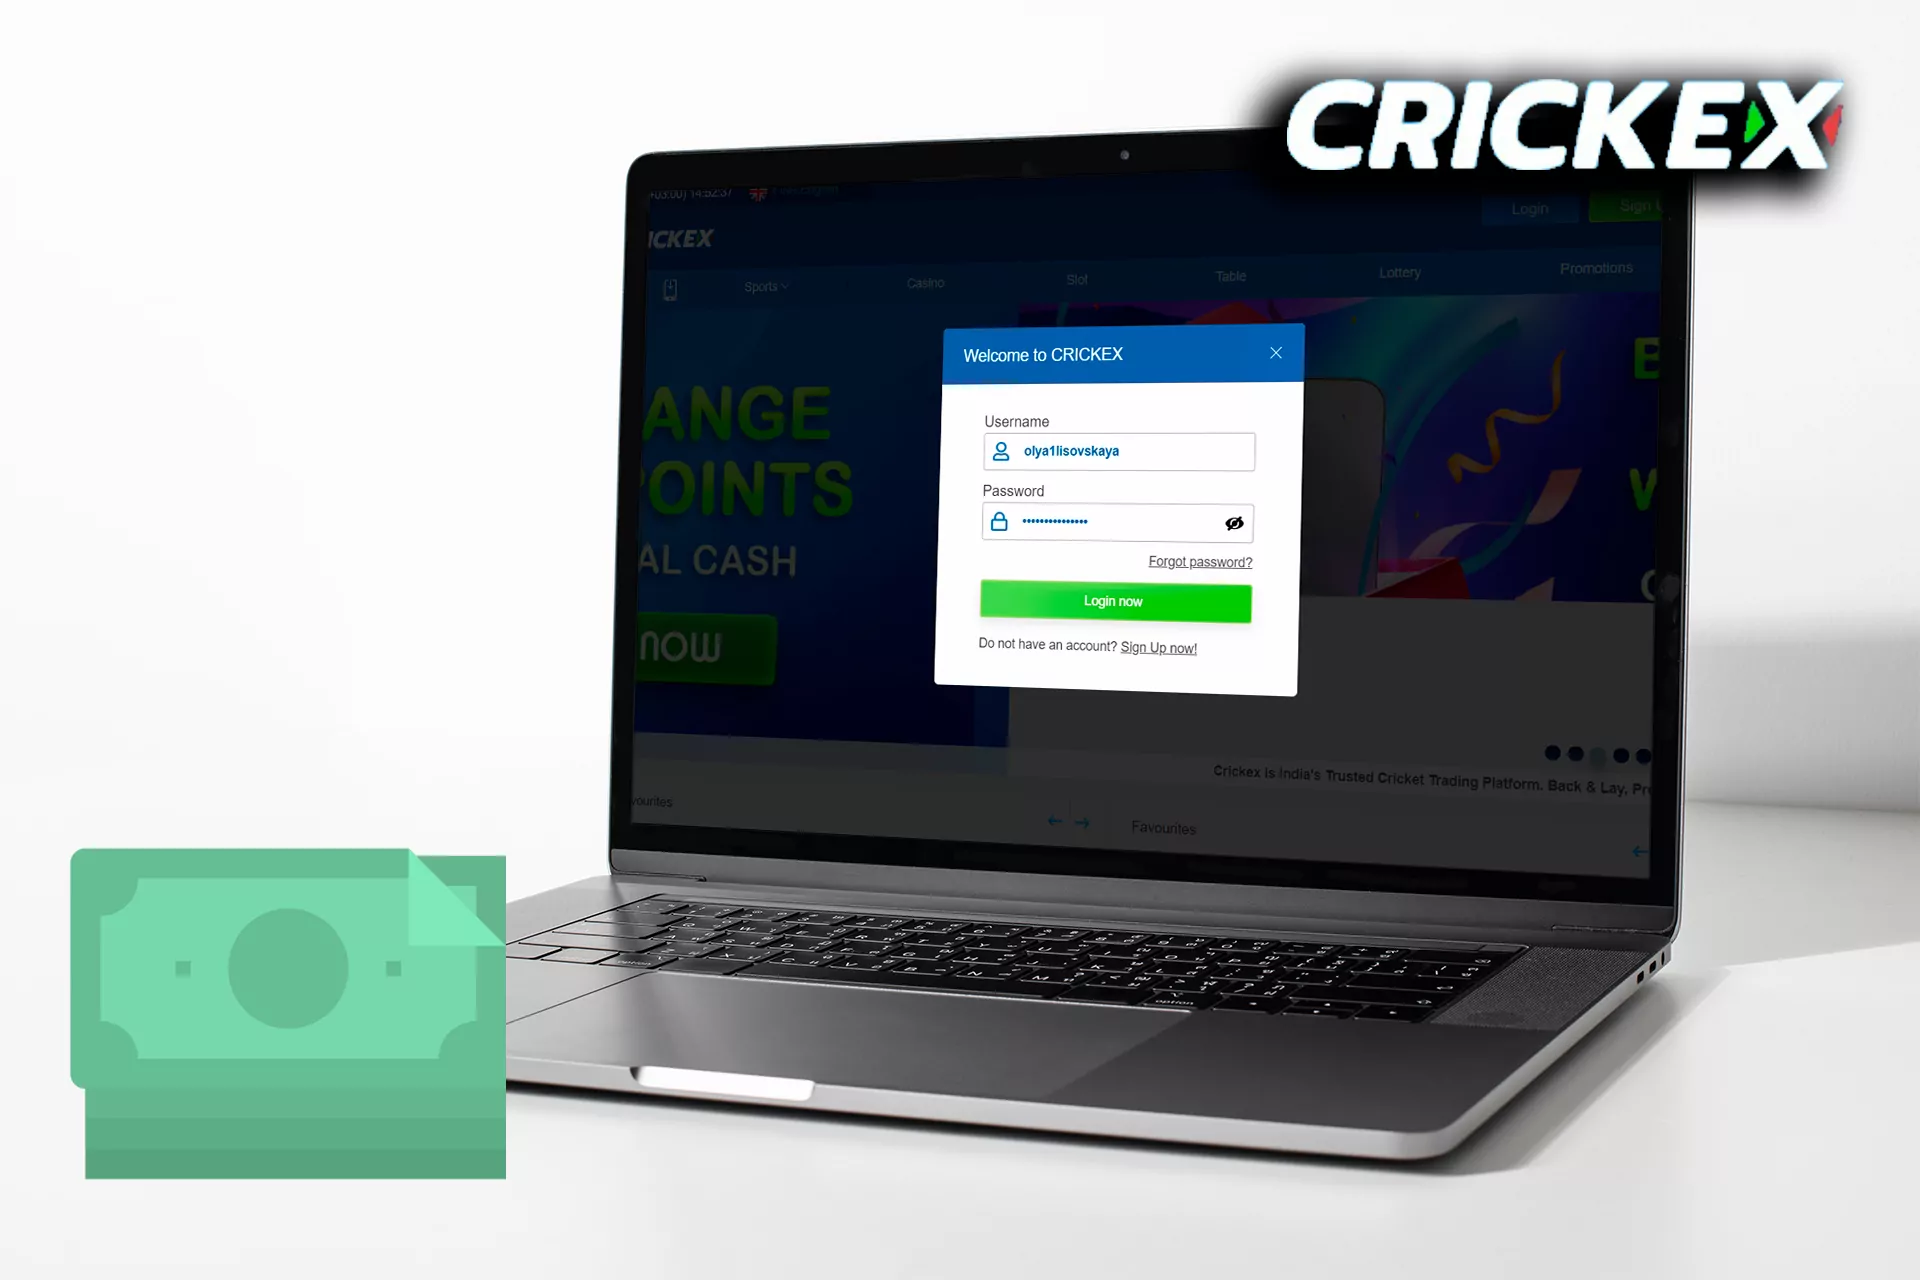 Log in to your Crickex account.